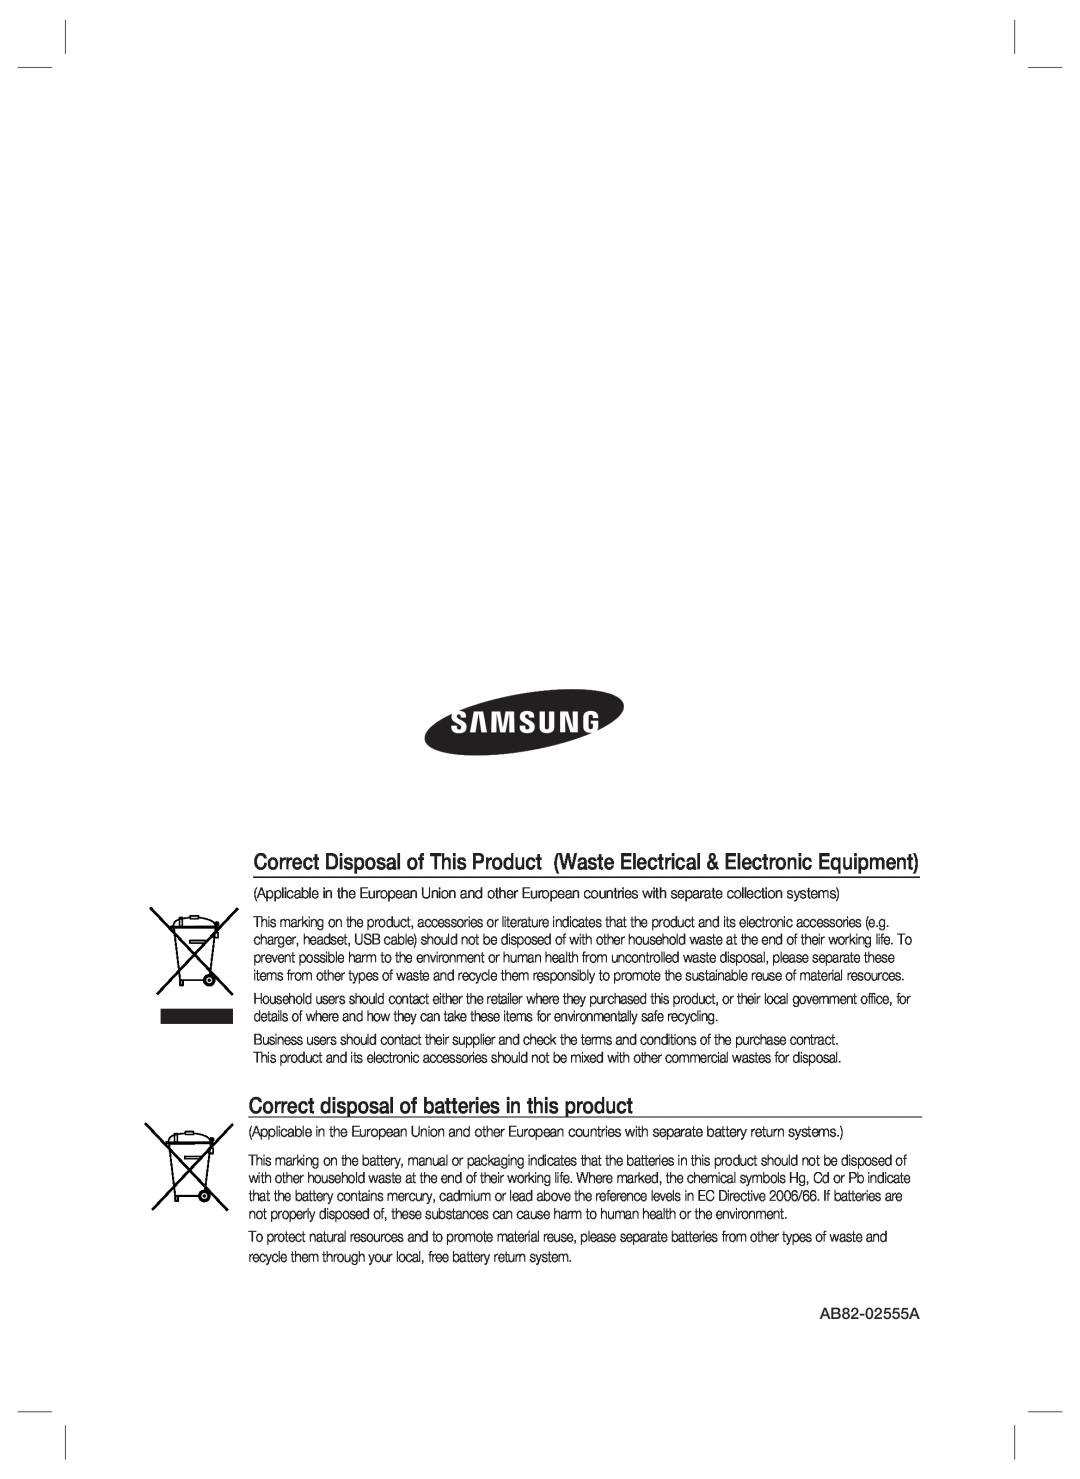 Samsung SSA-P102T user manual Correct disposal of batteries in this product 